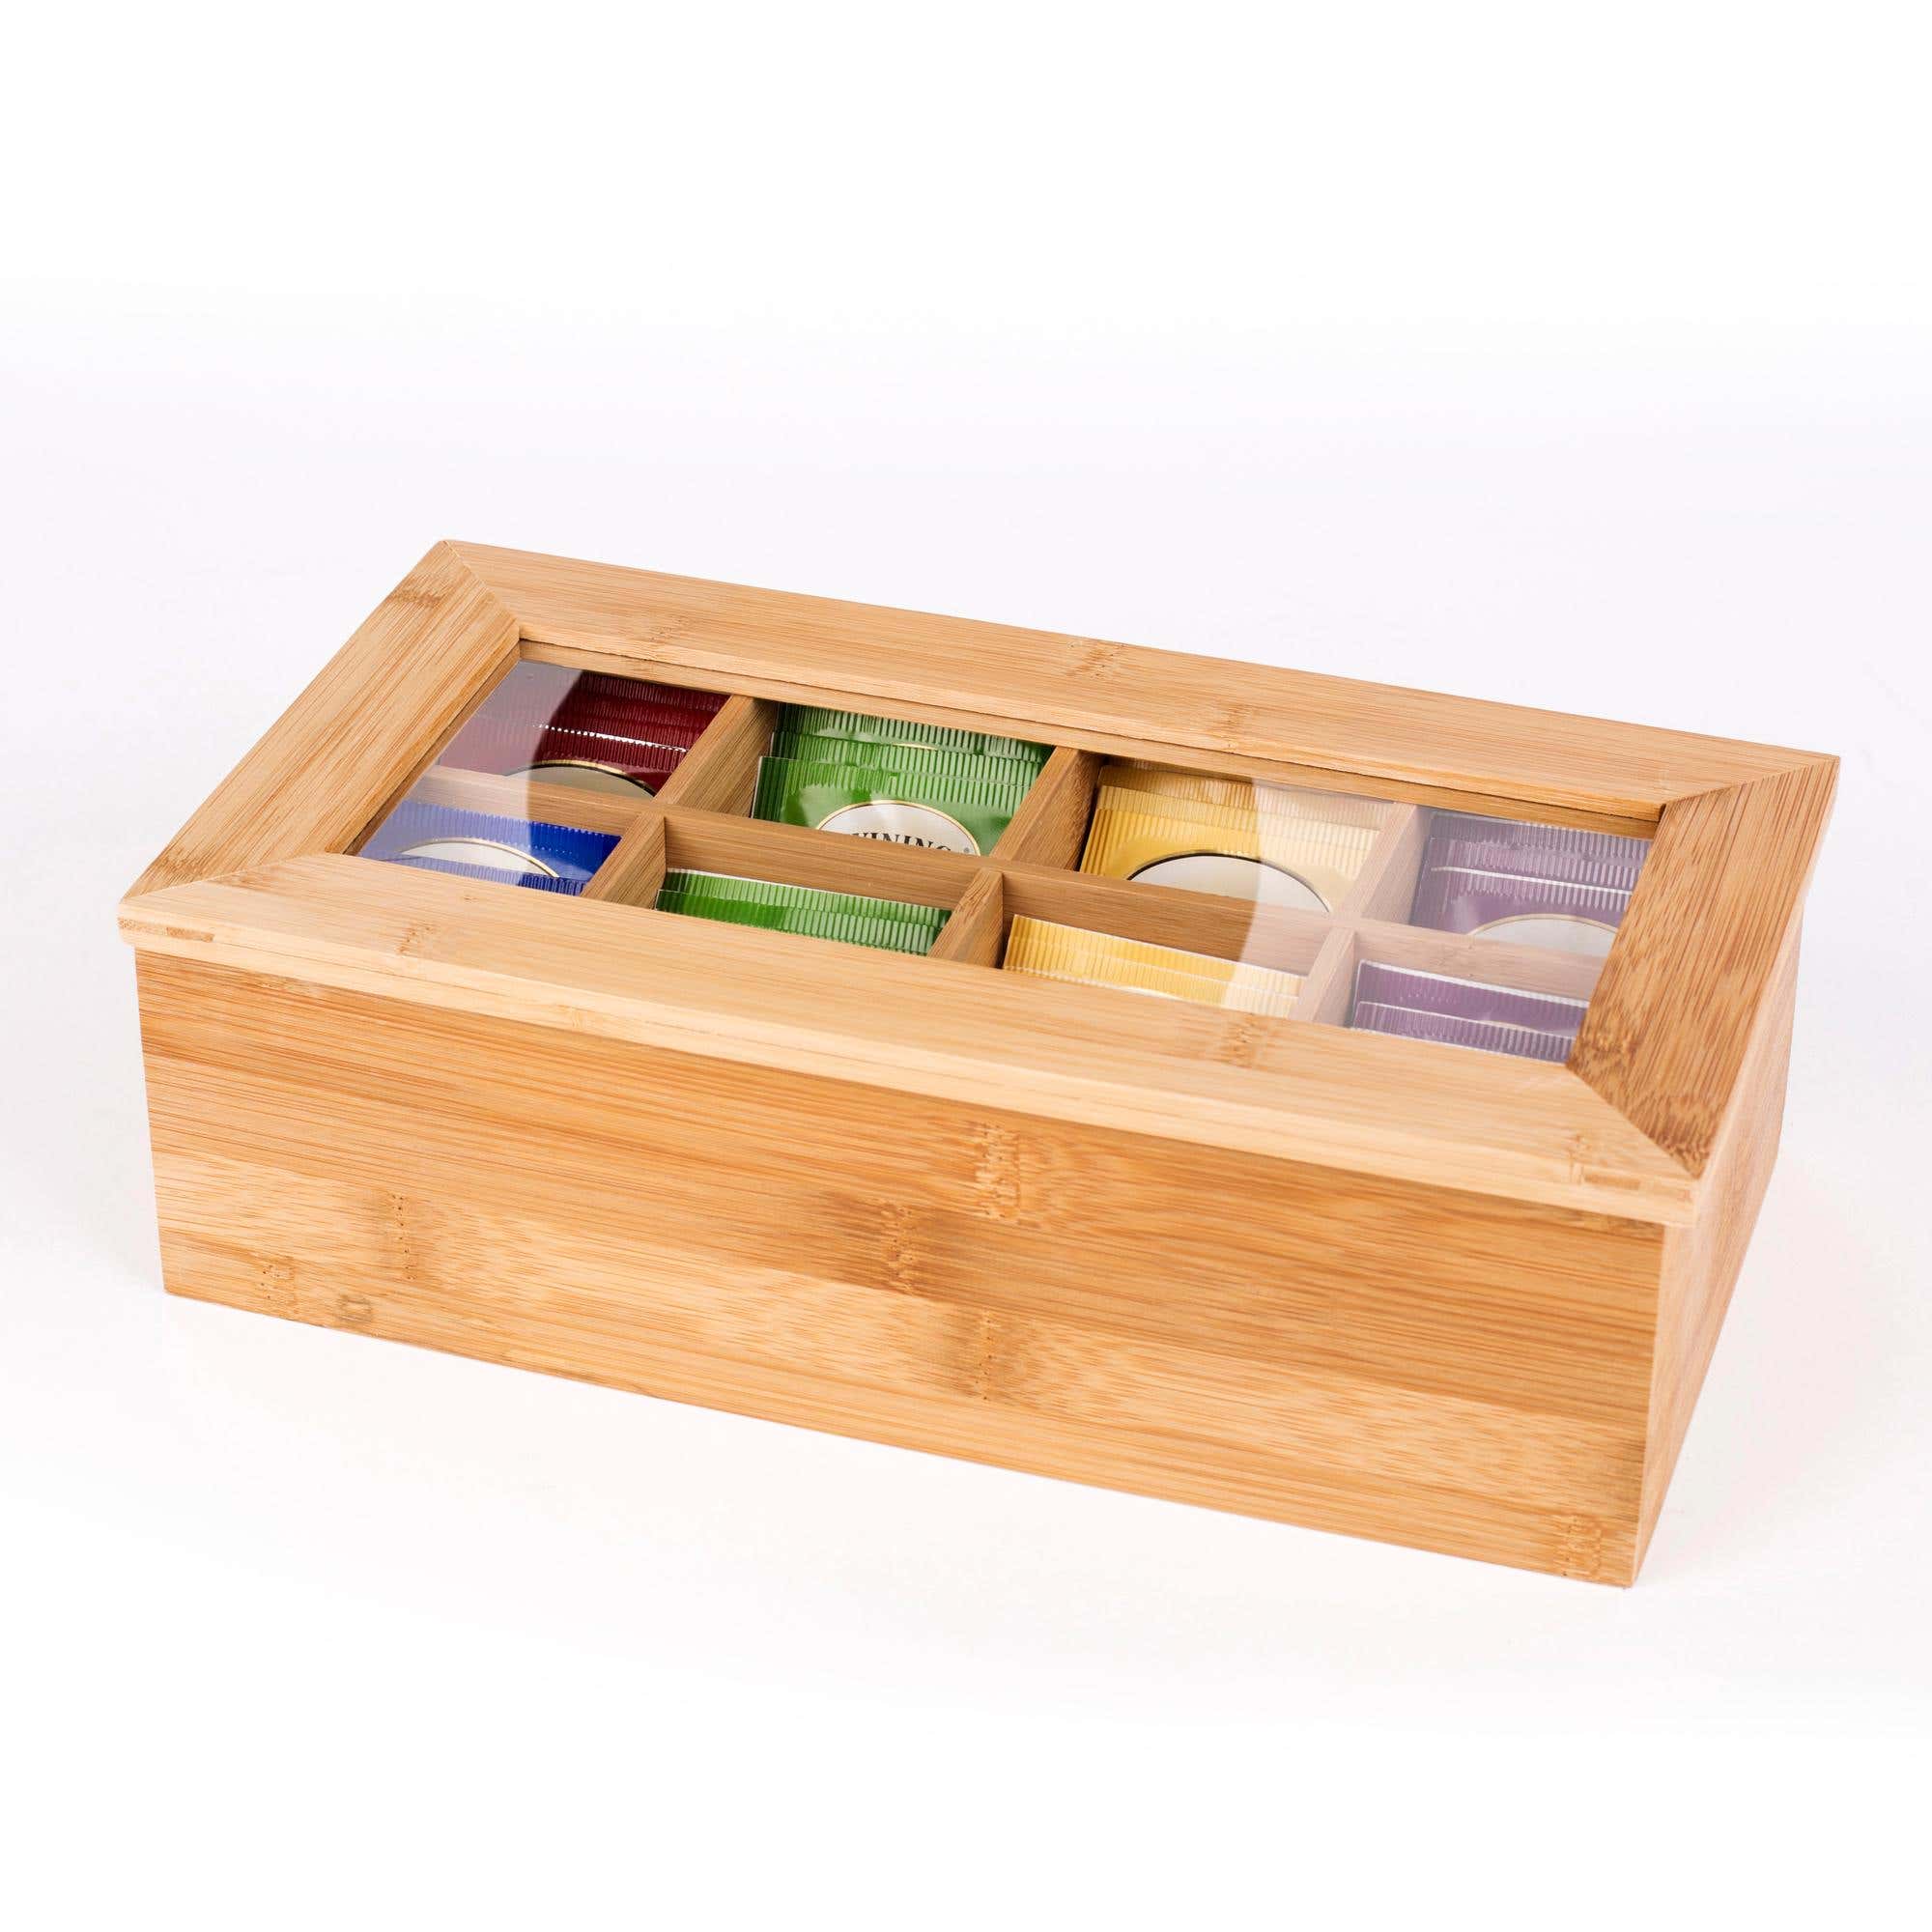 Coffee Tea Bag Holder Organizer For Kitchen Cabinets Bamboo Tea Box Storage Organizer Wooden Tea Chest Box With 9 Compartments starshop Bamboo Tea Box With Lid 